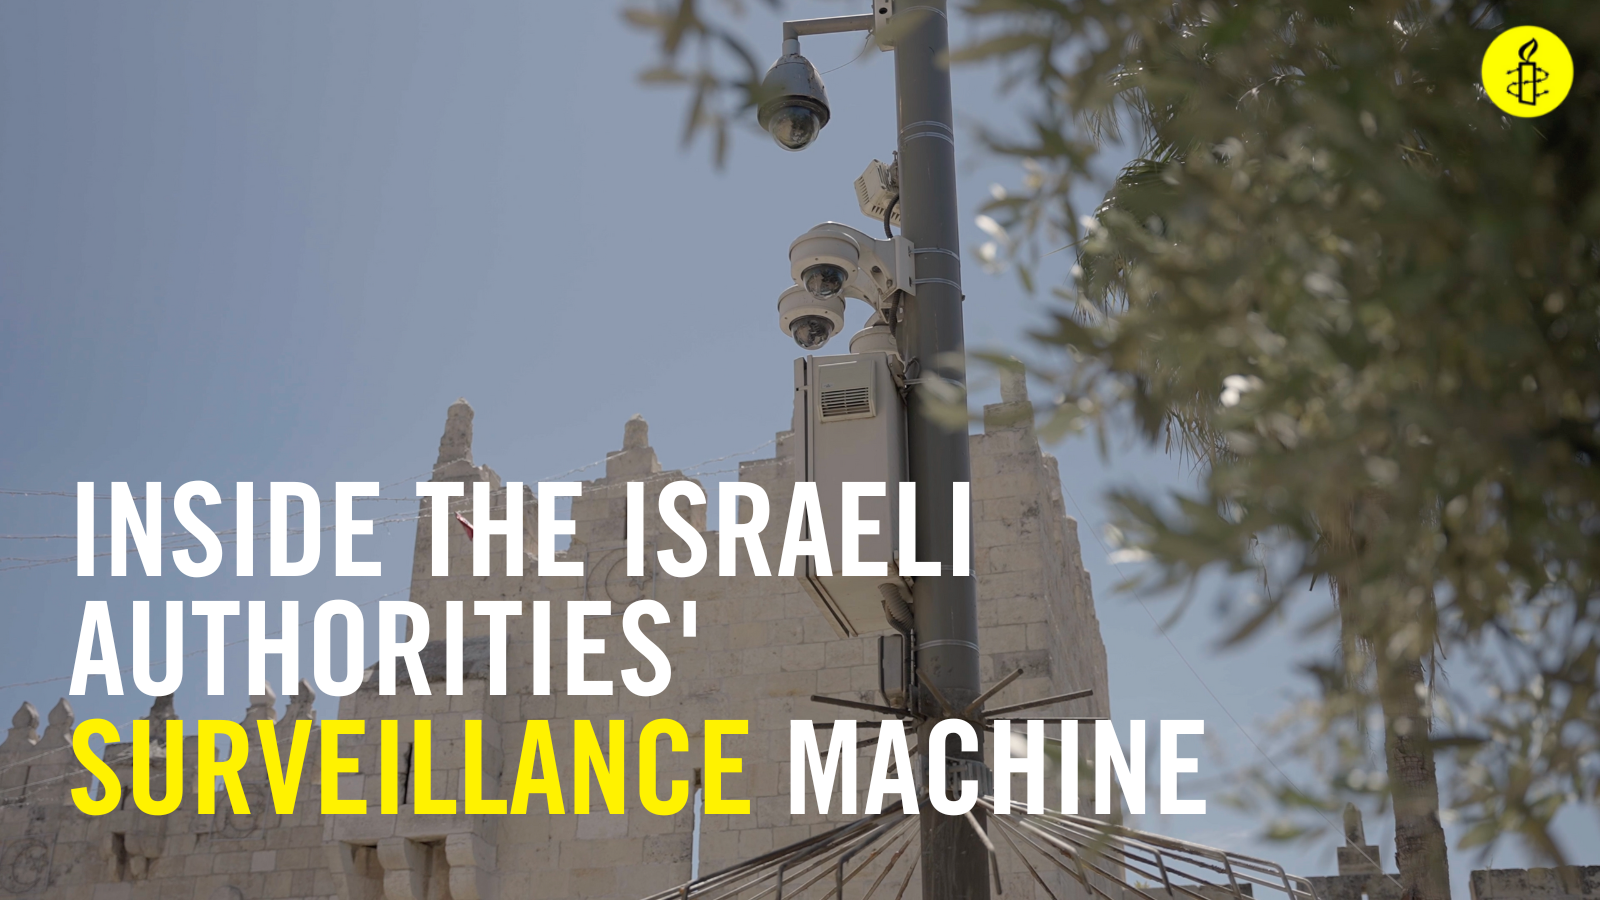 image reads "inside the Israeli authorities' surveillance machine, with picture of cameras